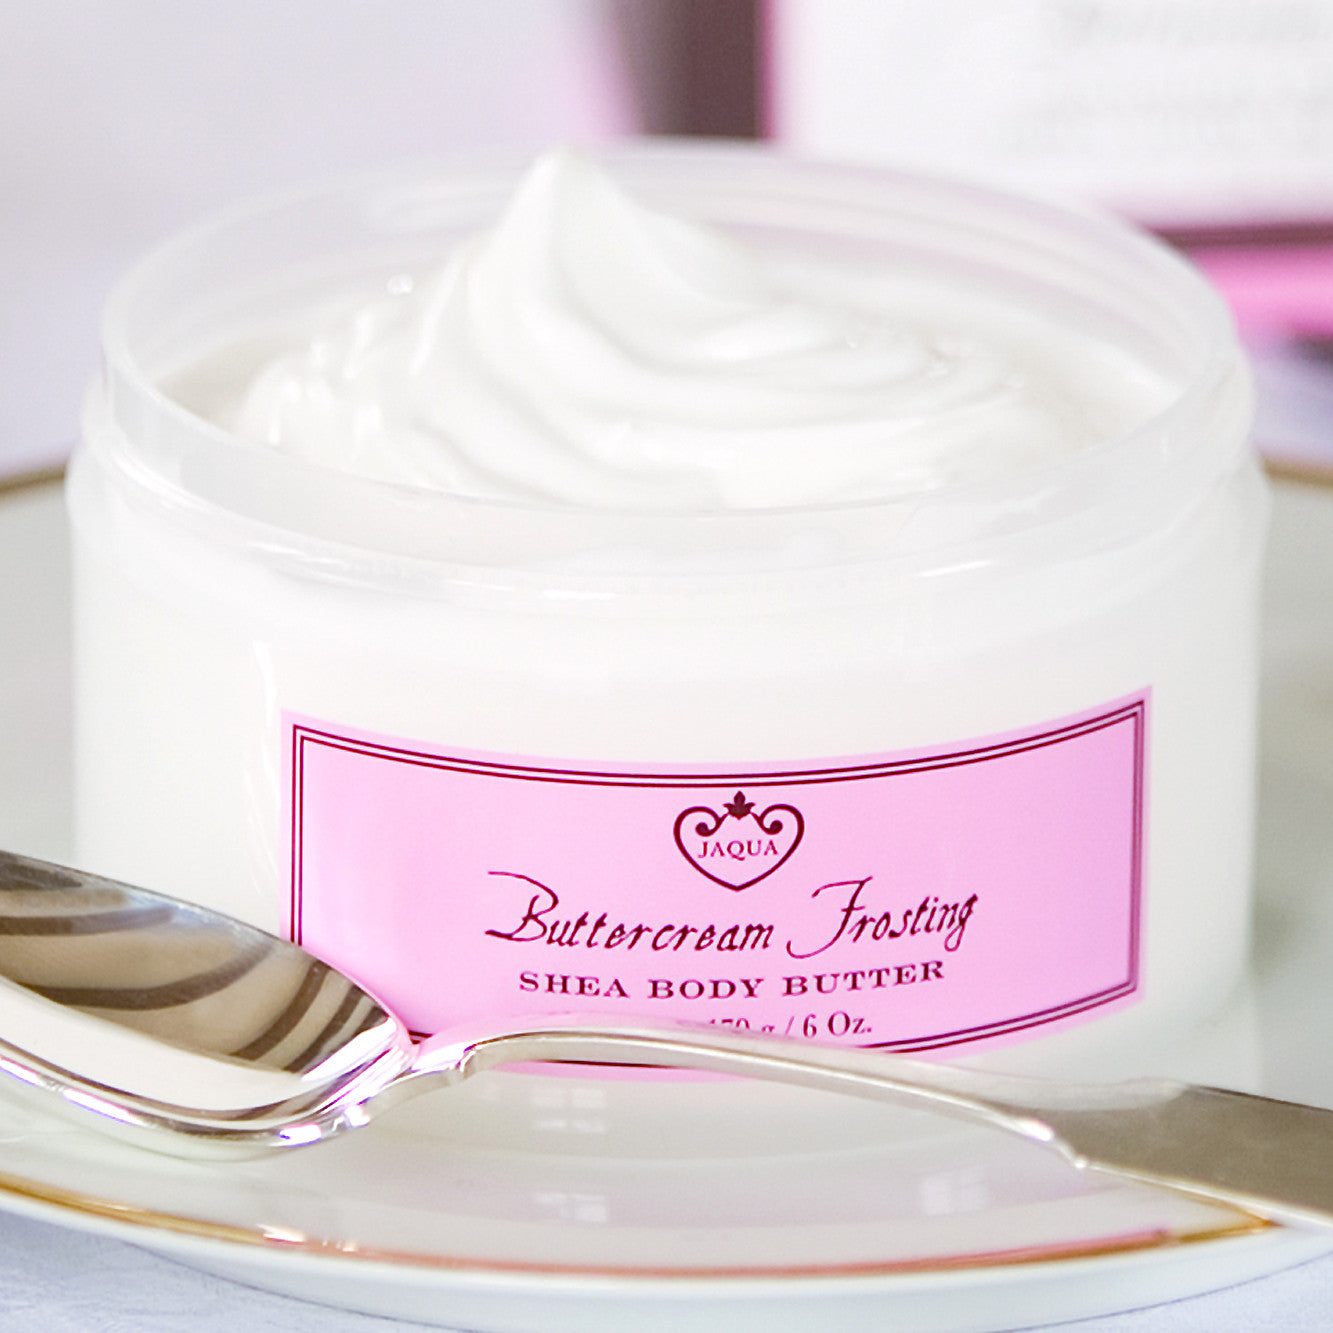 Buttercream Frosting Body Butter Smells Good Enough to Eat